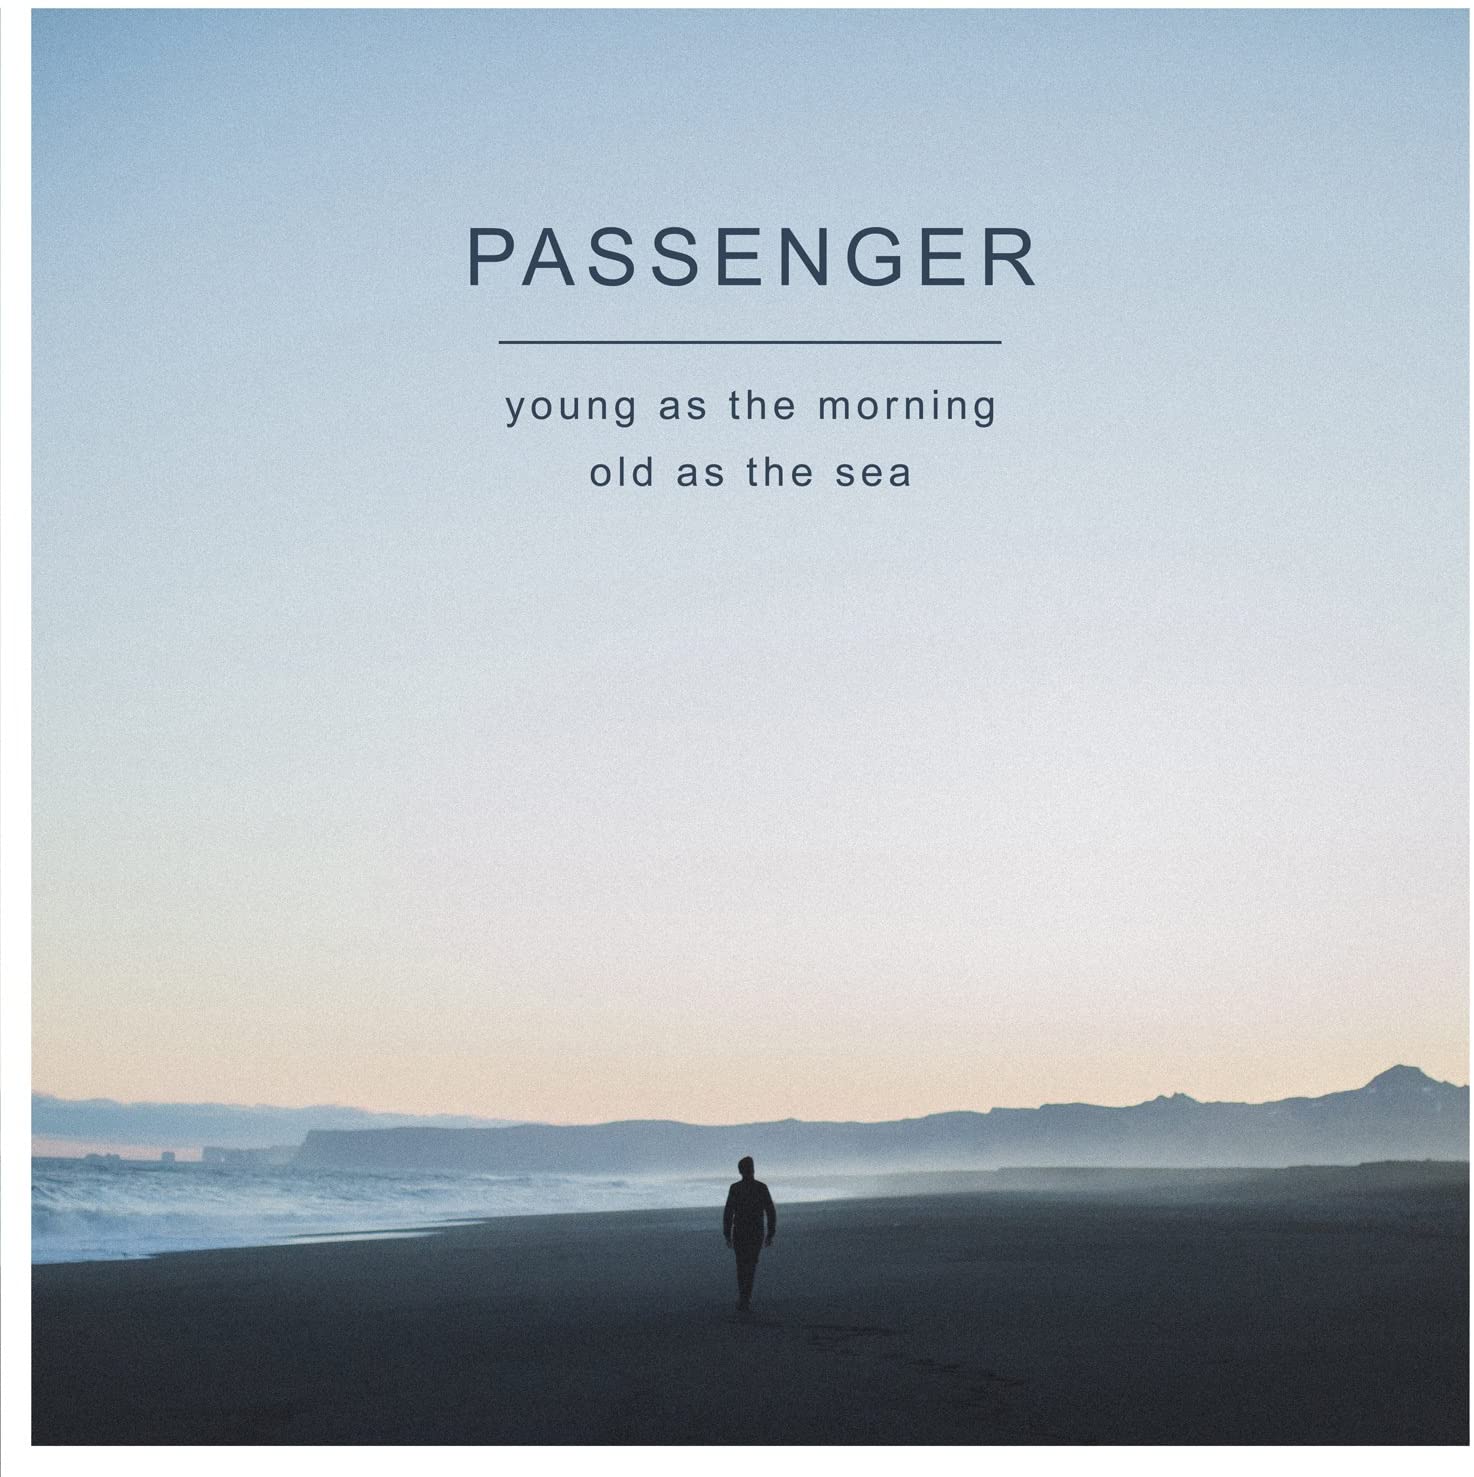 passengers young as the morning old as the sea